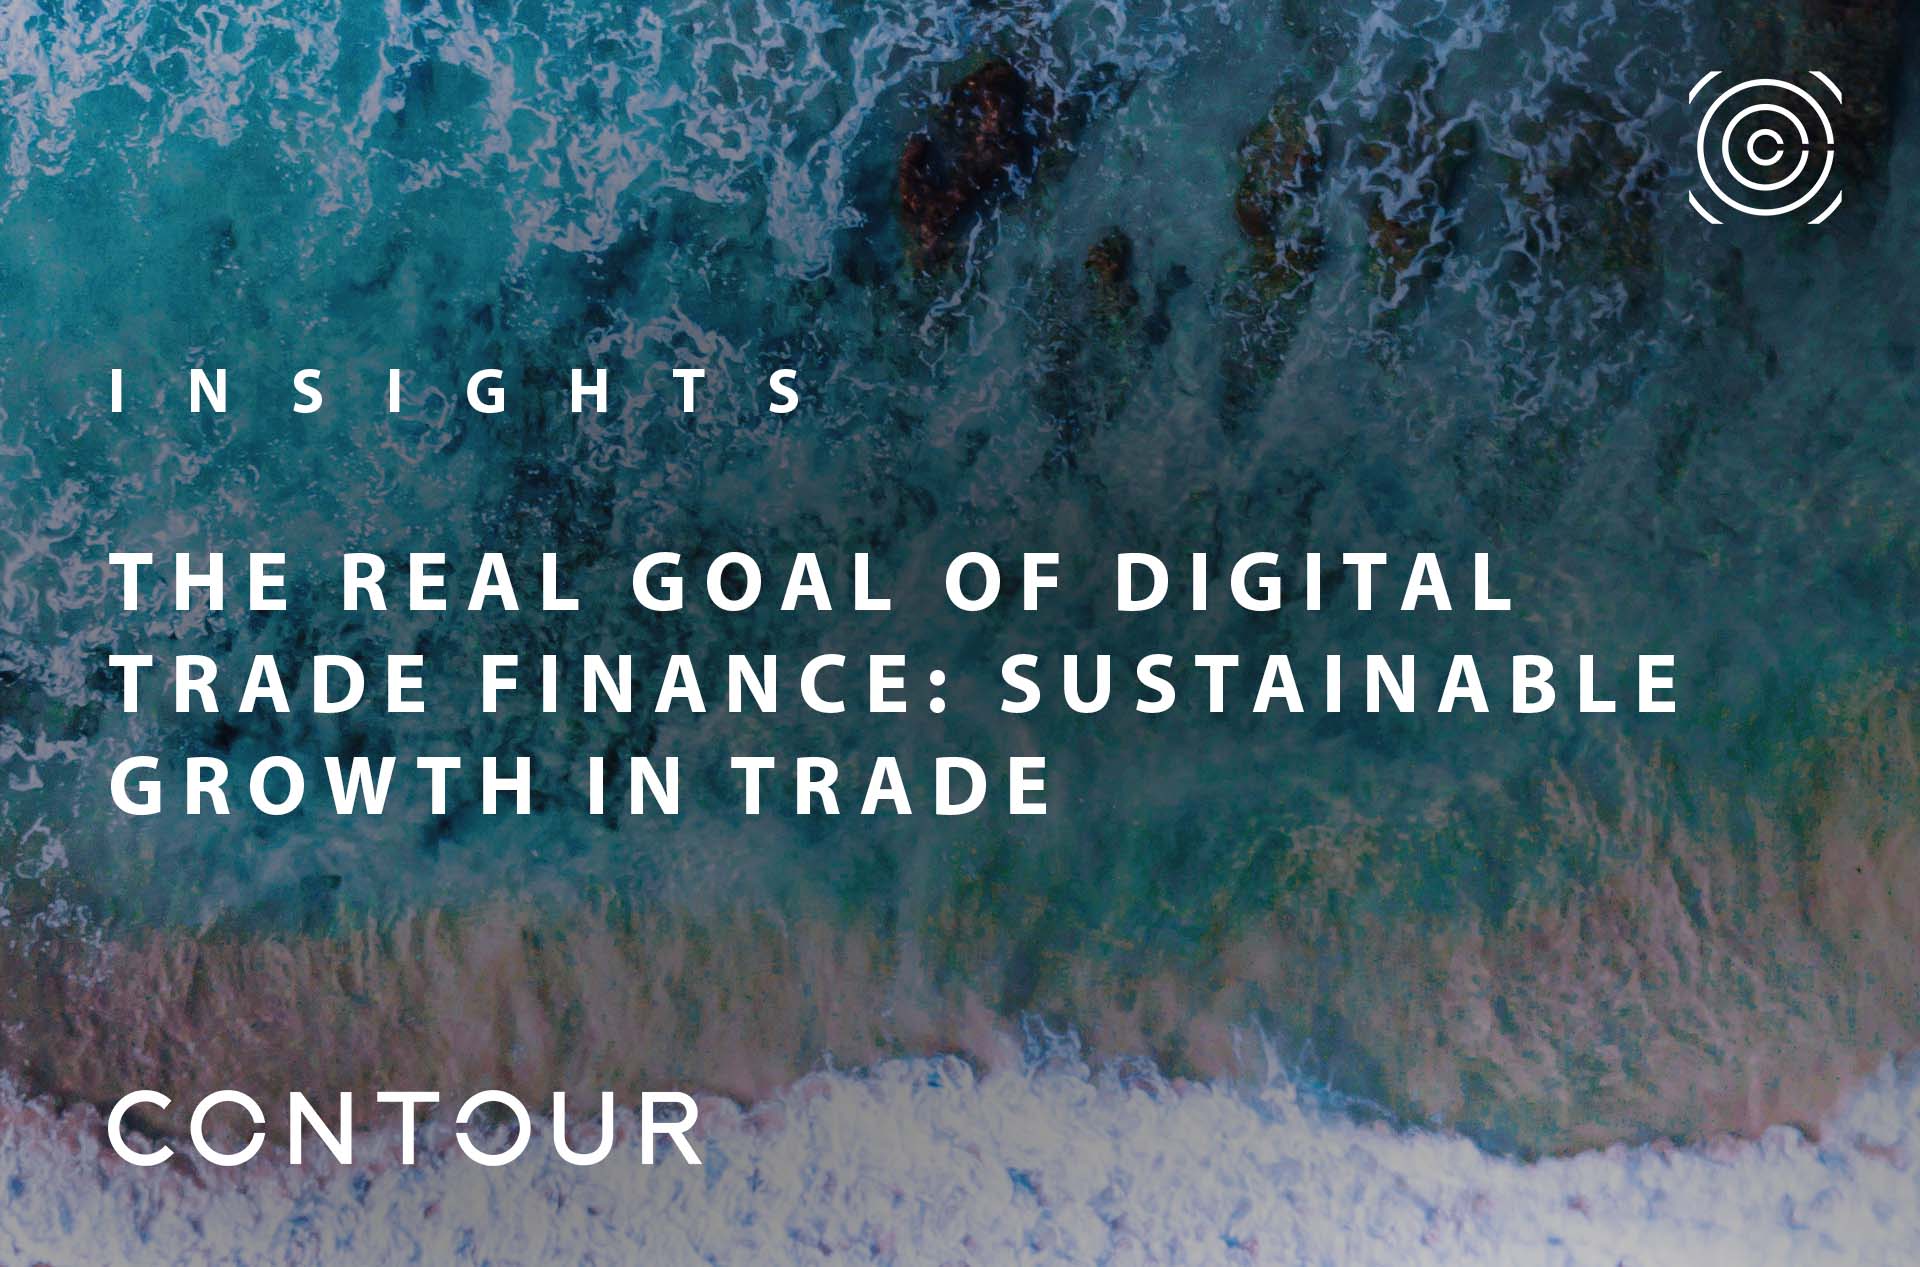 The Real Goal of Digital Trade Finance: Sustainable growth in trade